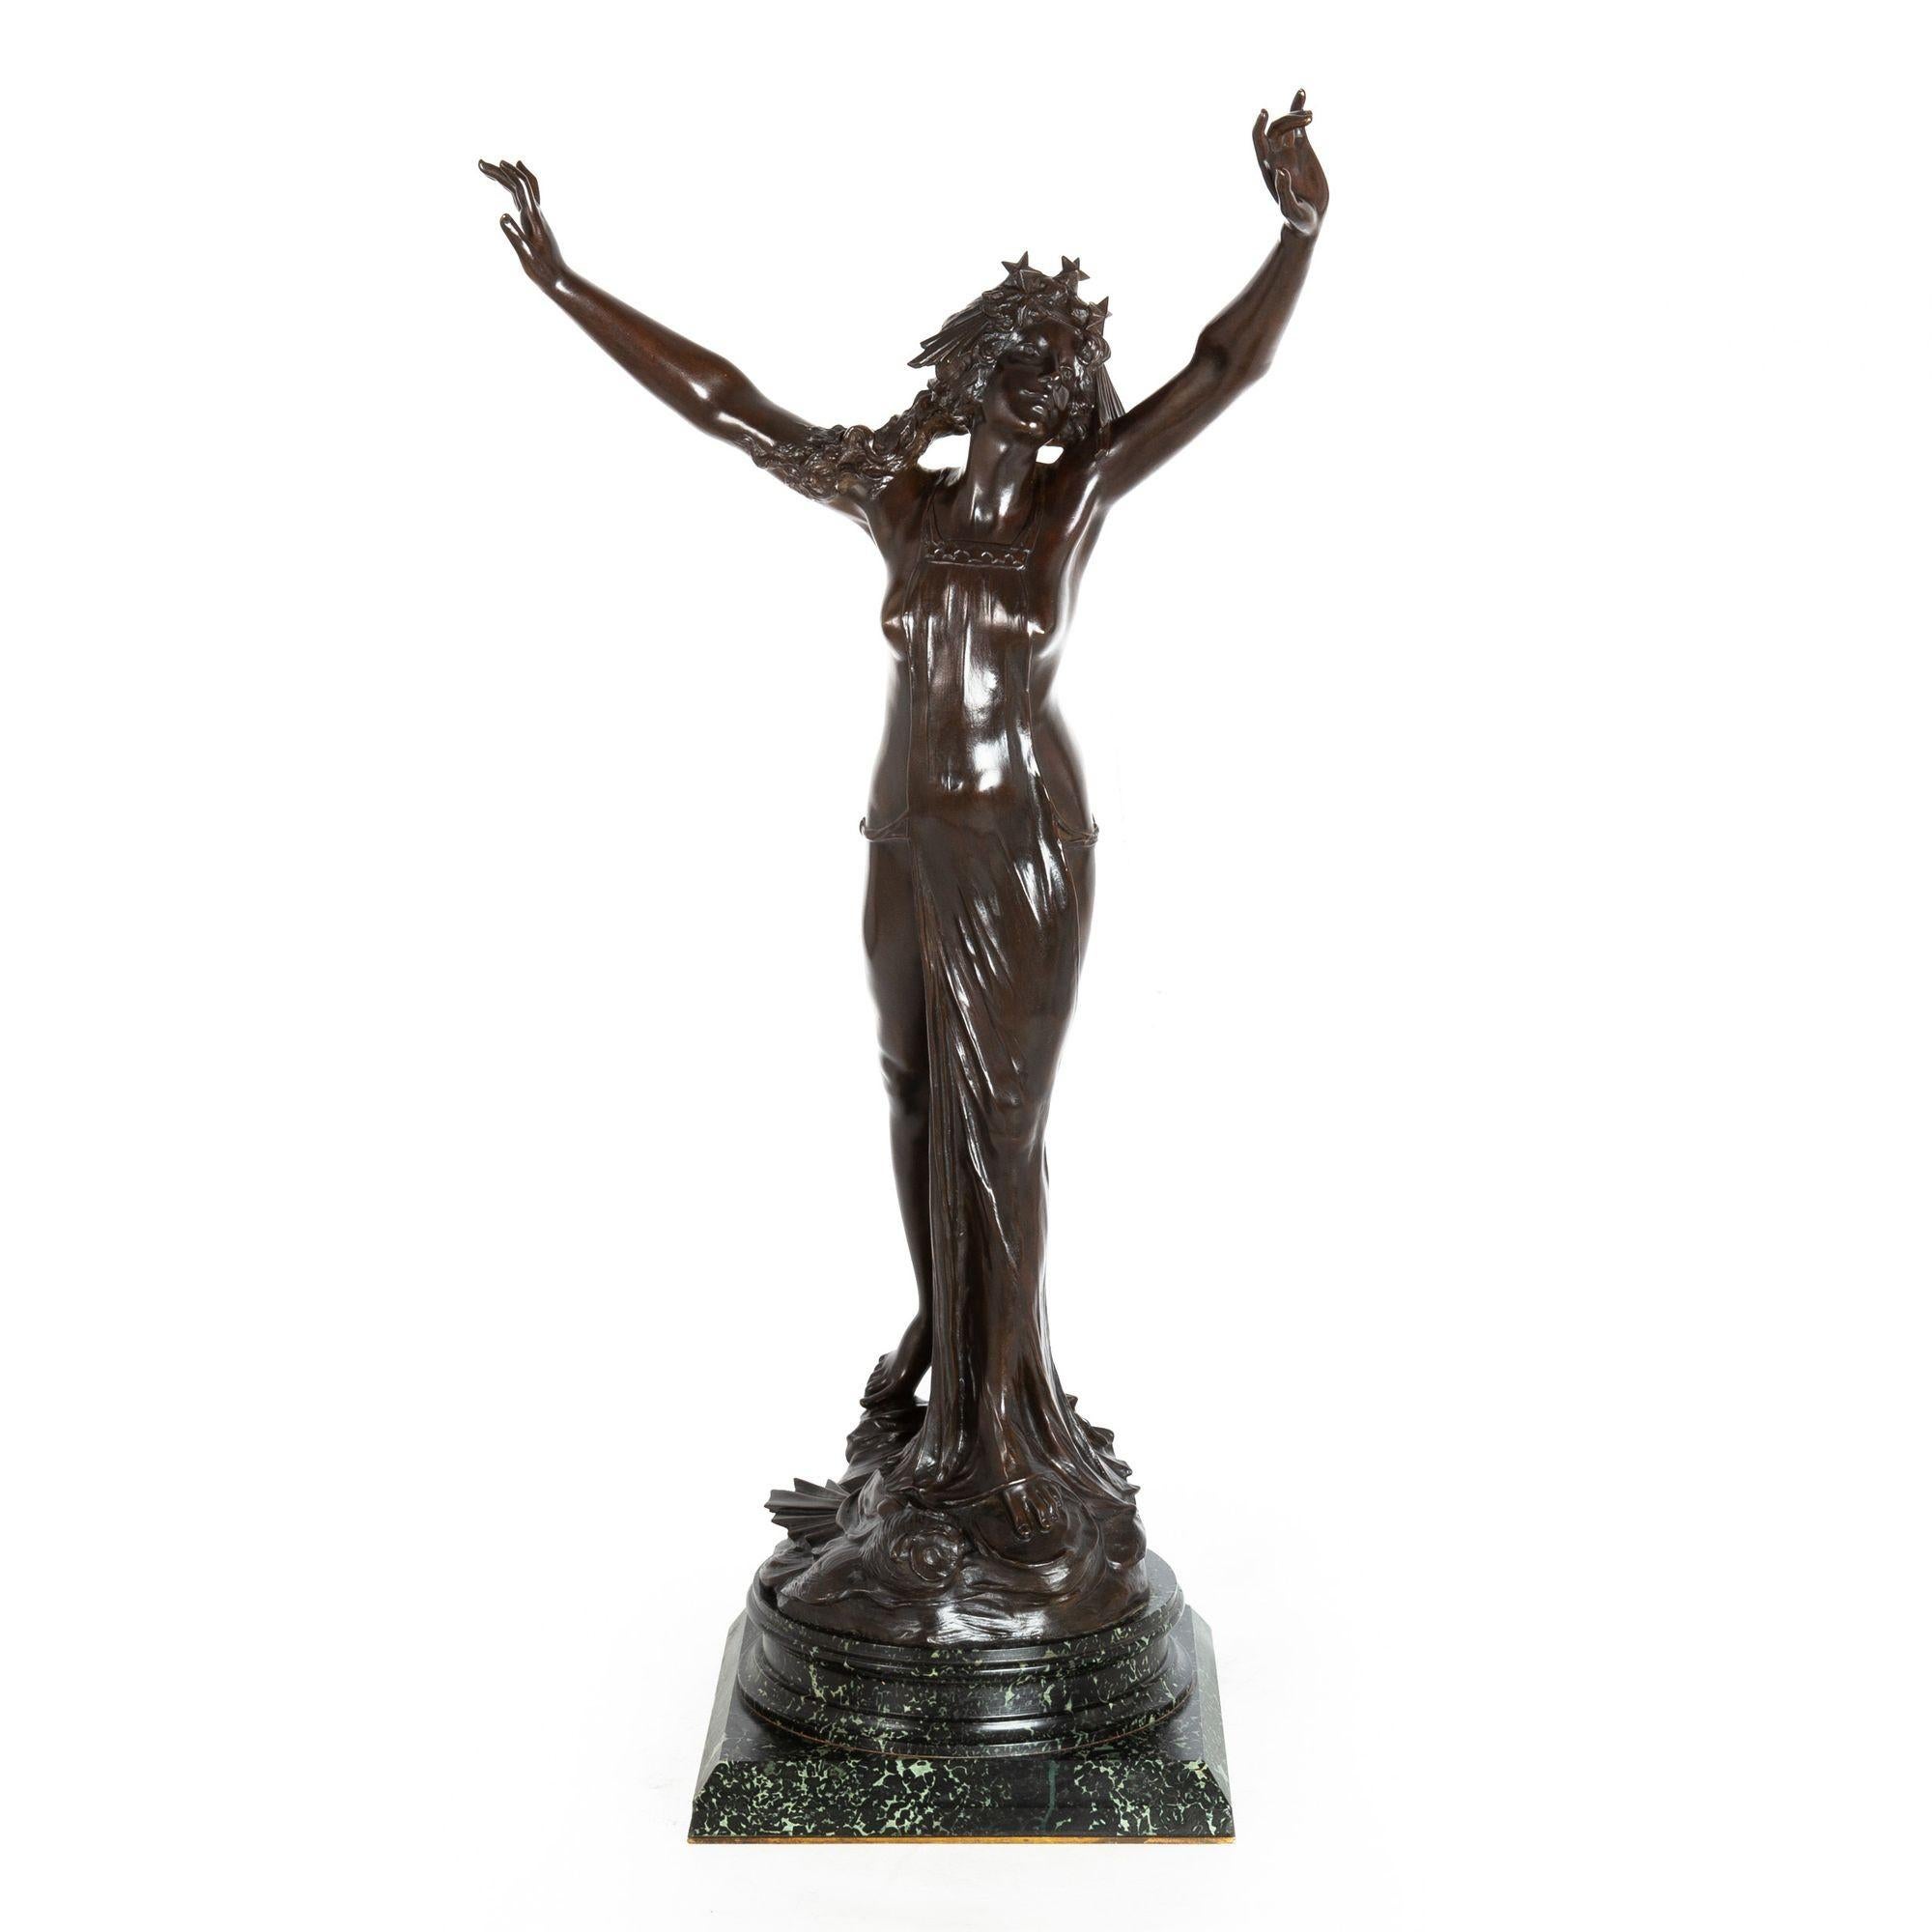 GEORGES FLAMAND
French, fl. 1895-1925

Ariadne and the Corona Borealis

Dark-brown patinated bronze over verde marble on bronze rim  signed in base 